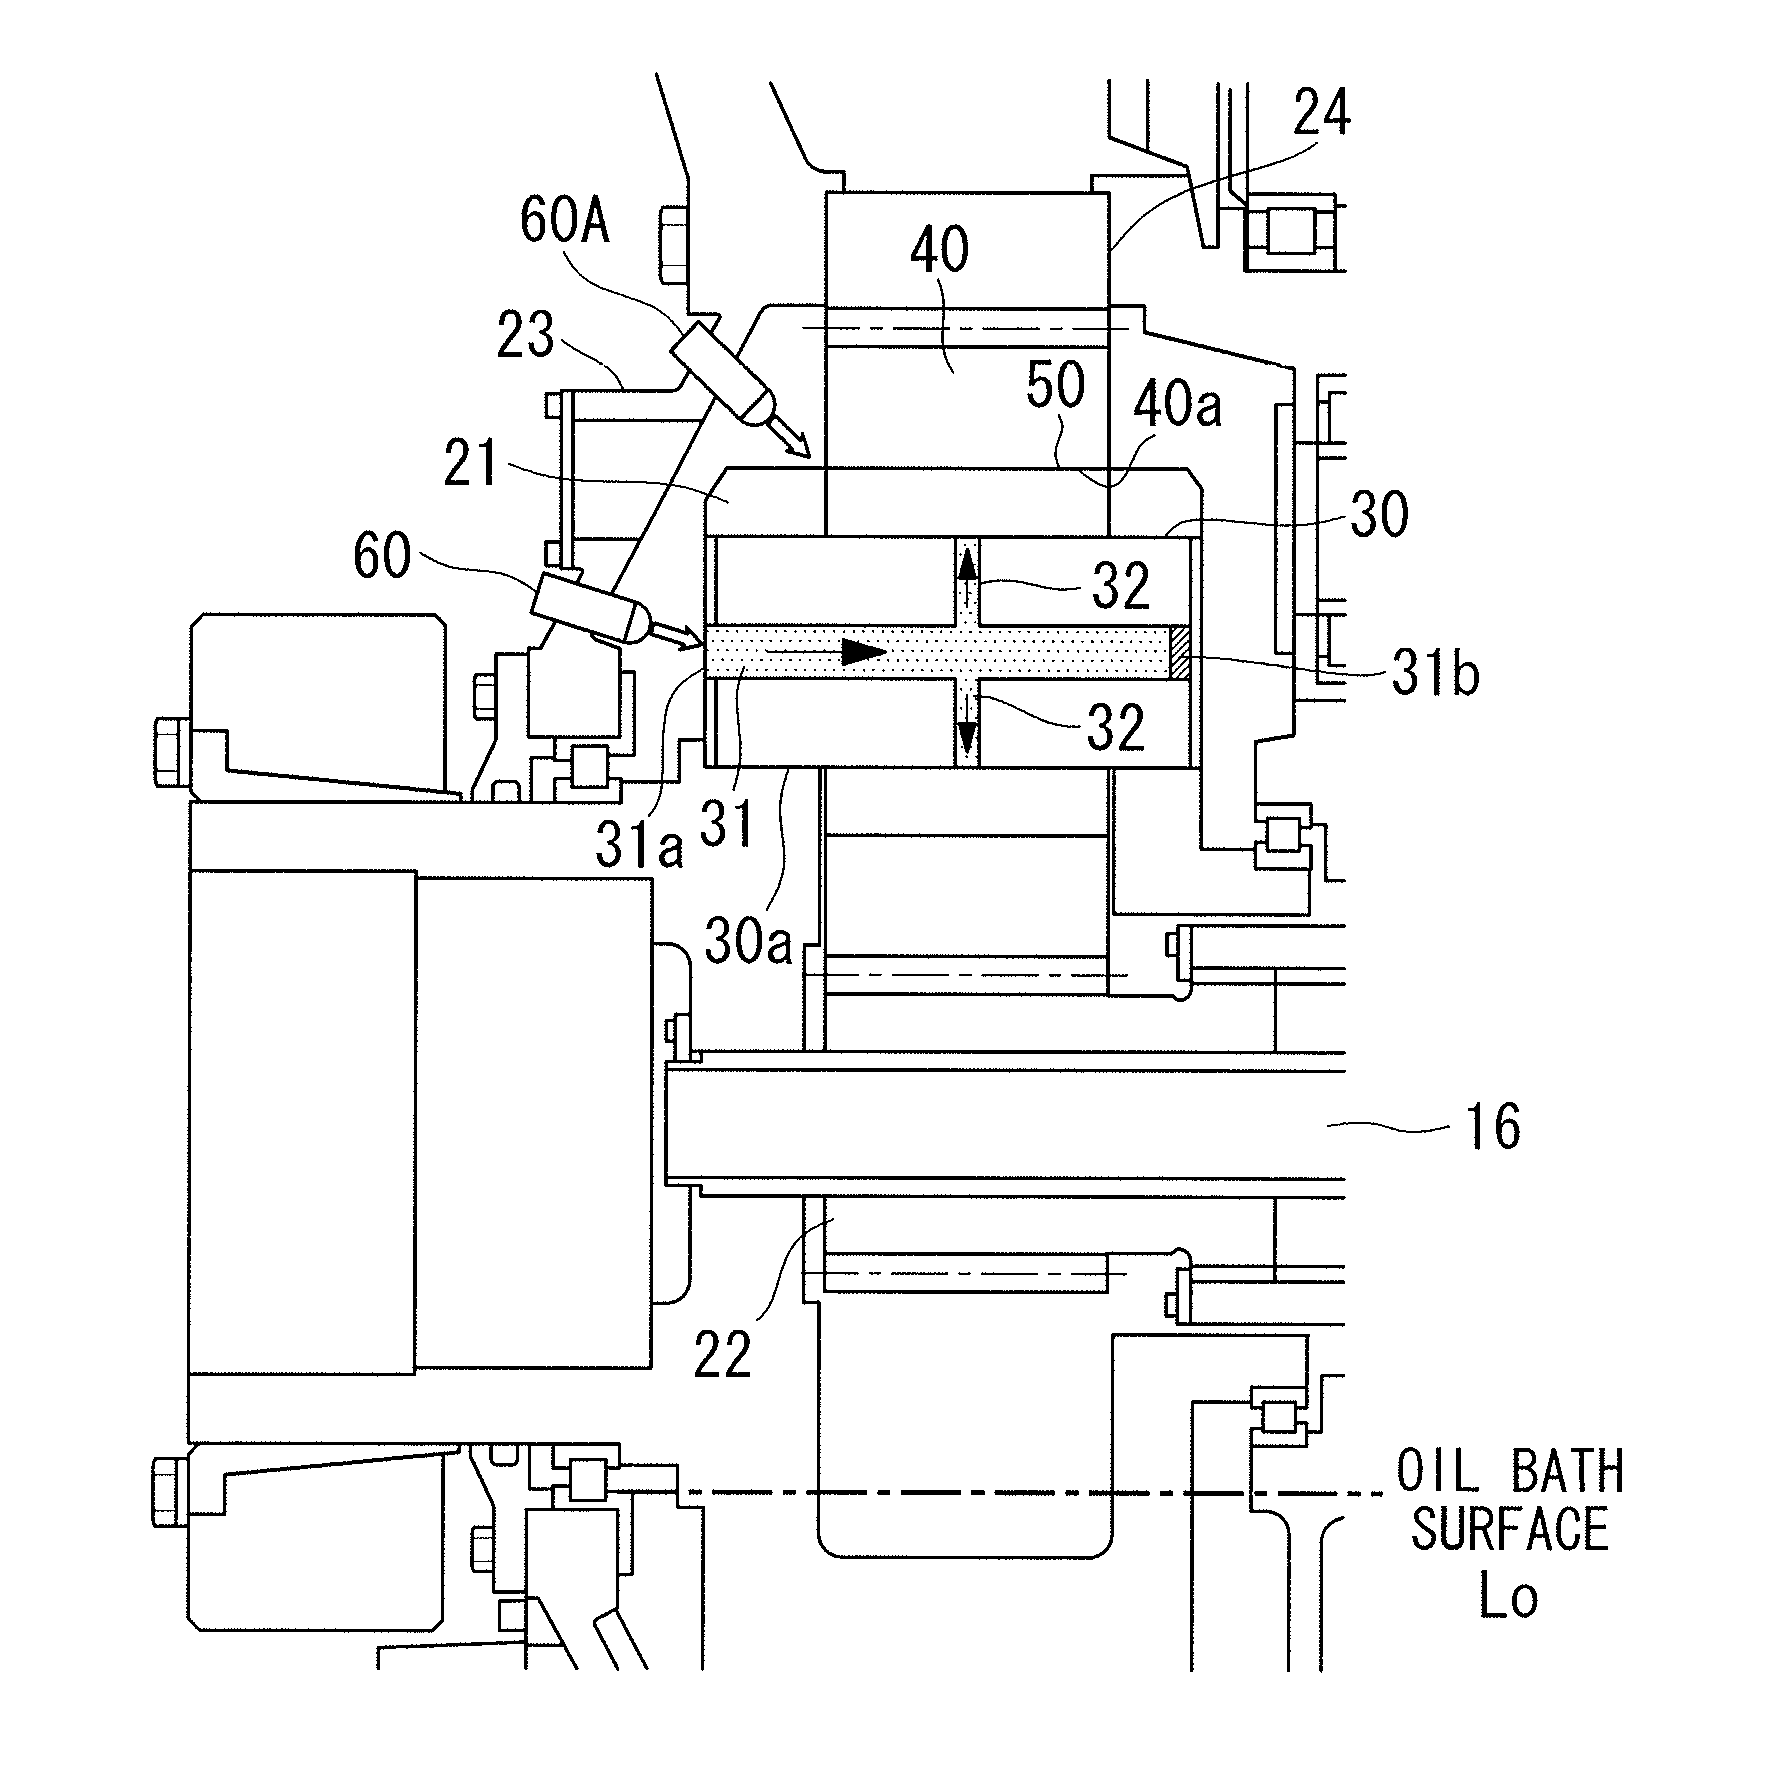 Bearing oil supply structure for wind turbine generator